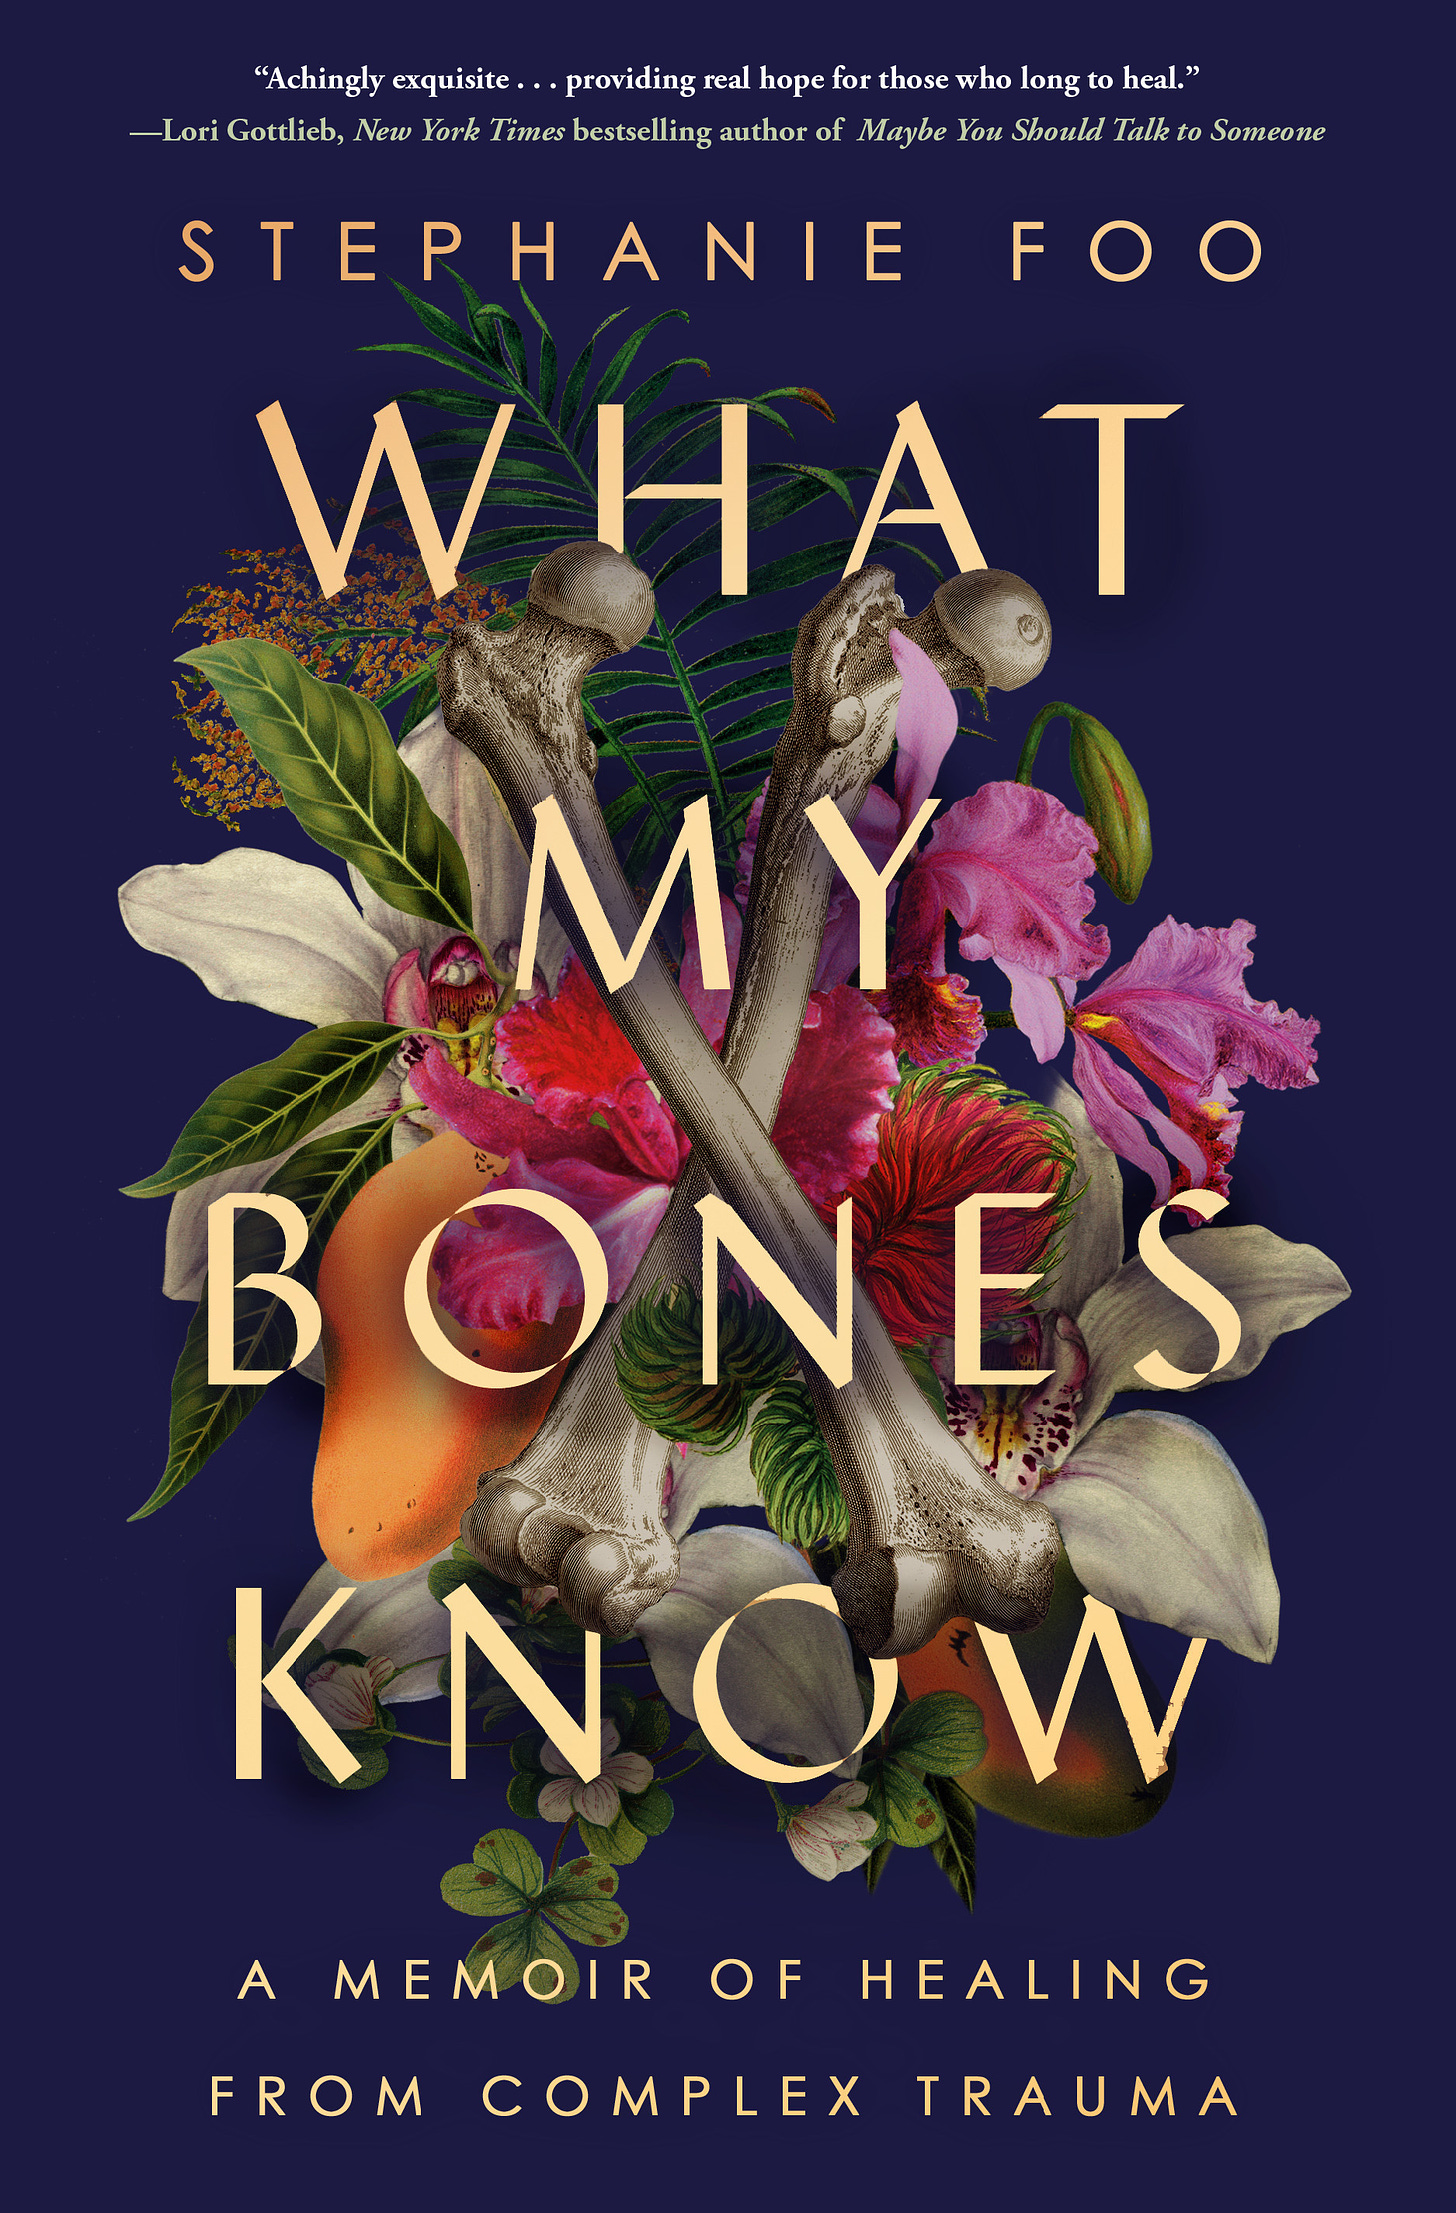 The cover of Stephanie Foo’s memoir What My Bones Know shows a lush assortment of plants and fruit, including ferns, wood sorrel, rambutans, mangoes and orchids, against a navy background. Over this are two bones, crossed in the shape of an X. The text reads: “Achingly exquisite…providing real hope for those who long to heal.” (in white type),  --Lori Gottlieb, New York Times bestselling author of Maybe You Should Talk to Someone (in green type) Stephanie Foo, What My Bones Know, A memoir of healing from complex trauma (in yellow type). Jacket design: Grace Han.